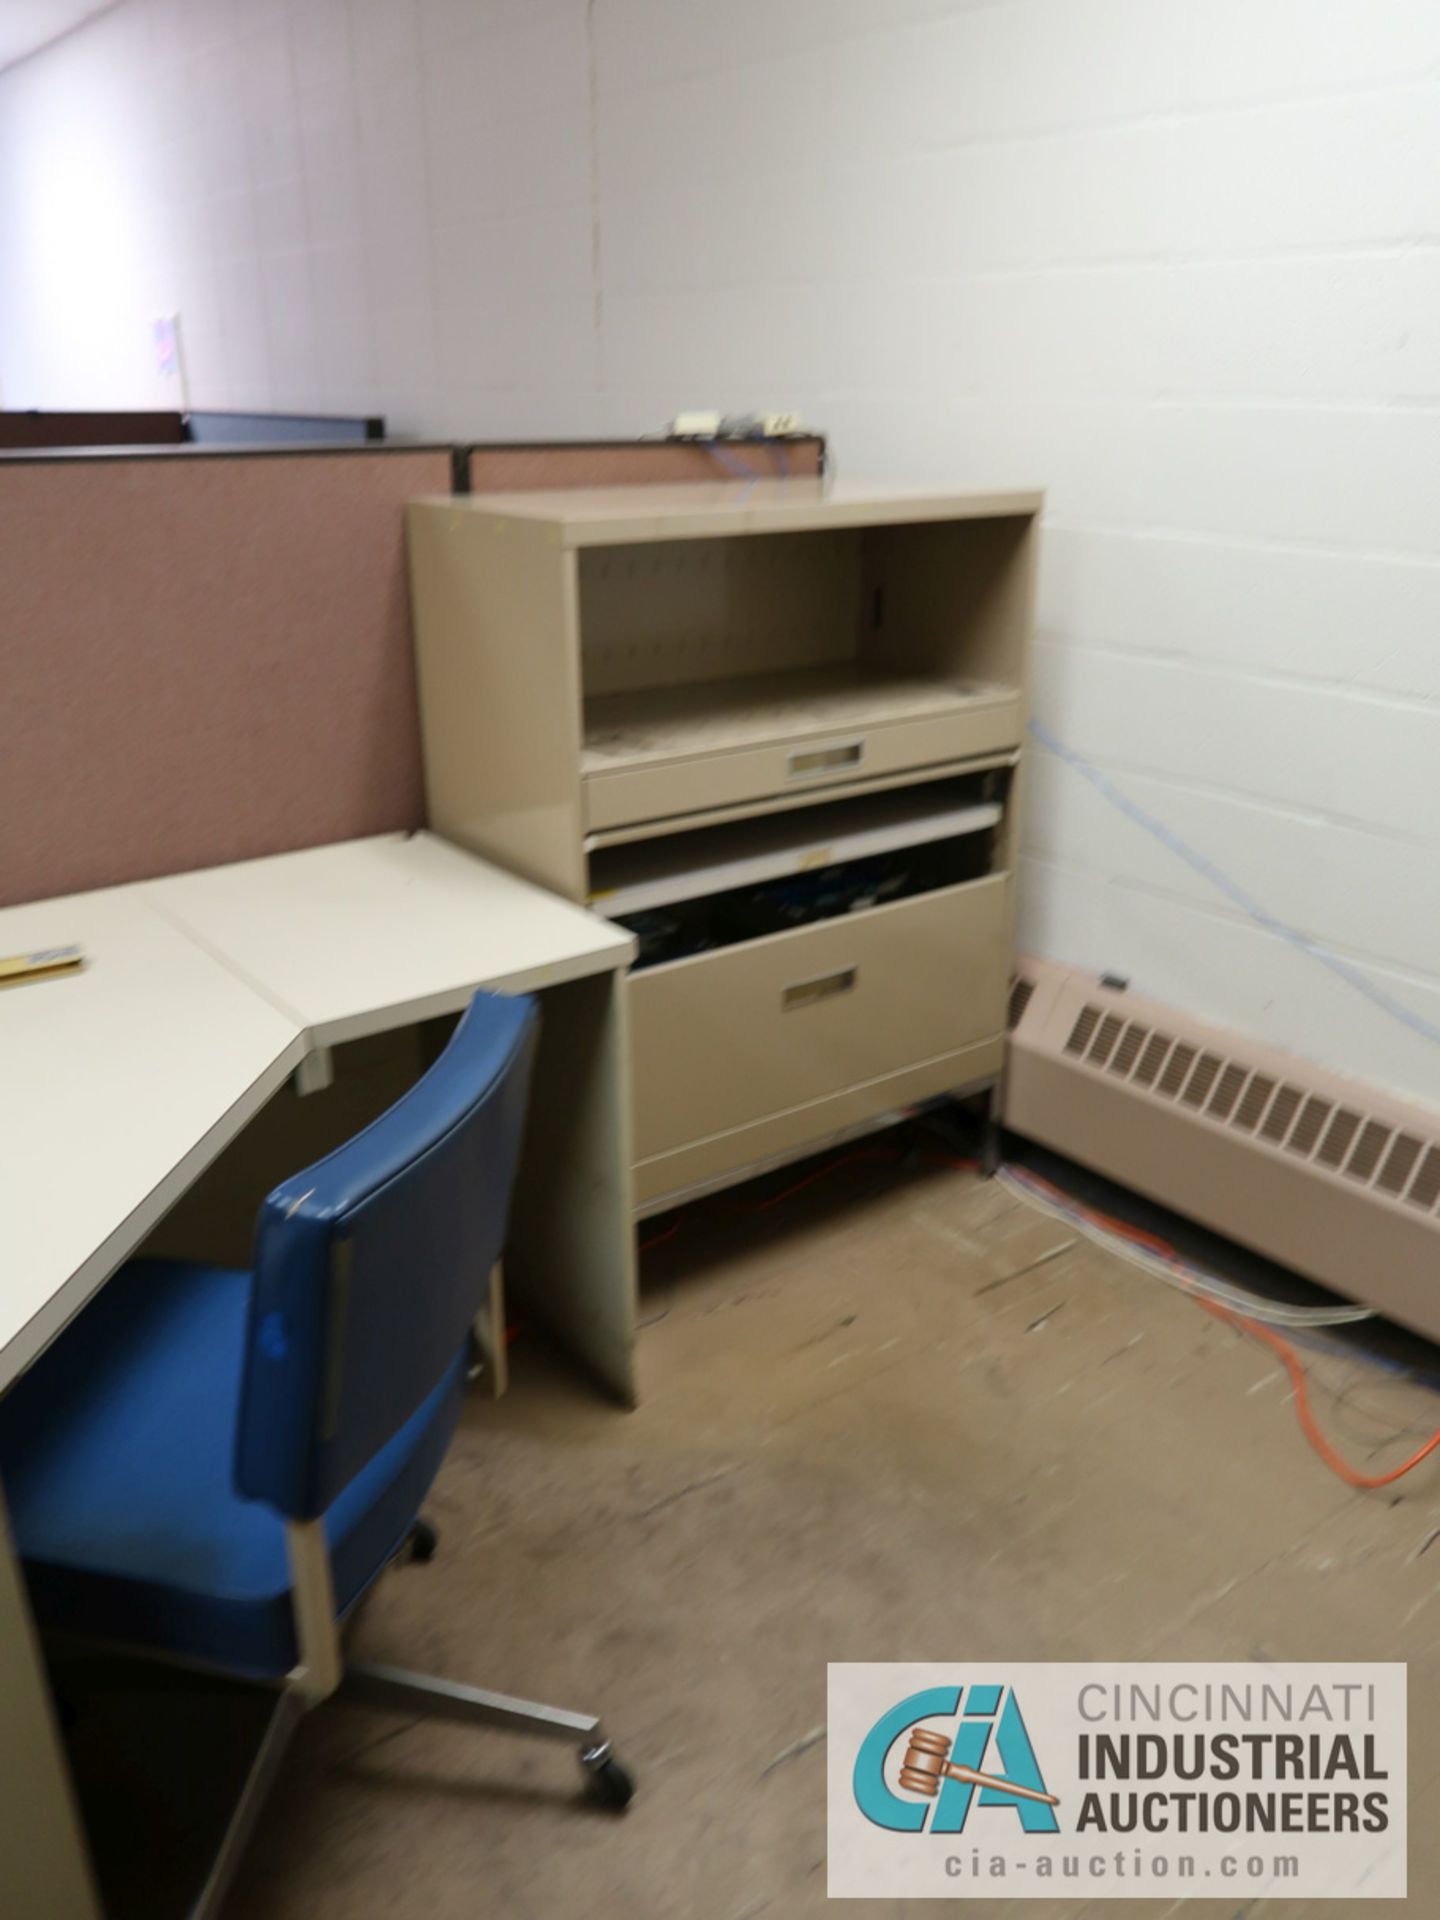 (LOT) FURNITURE IN CUBICLE INCLUDING (2) DESKS, (2) CABINETS, TABLE - Image 2 of 3